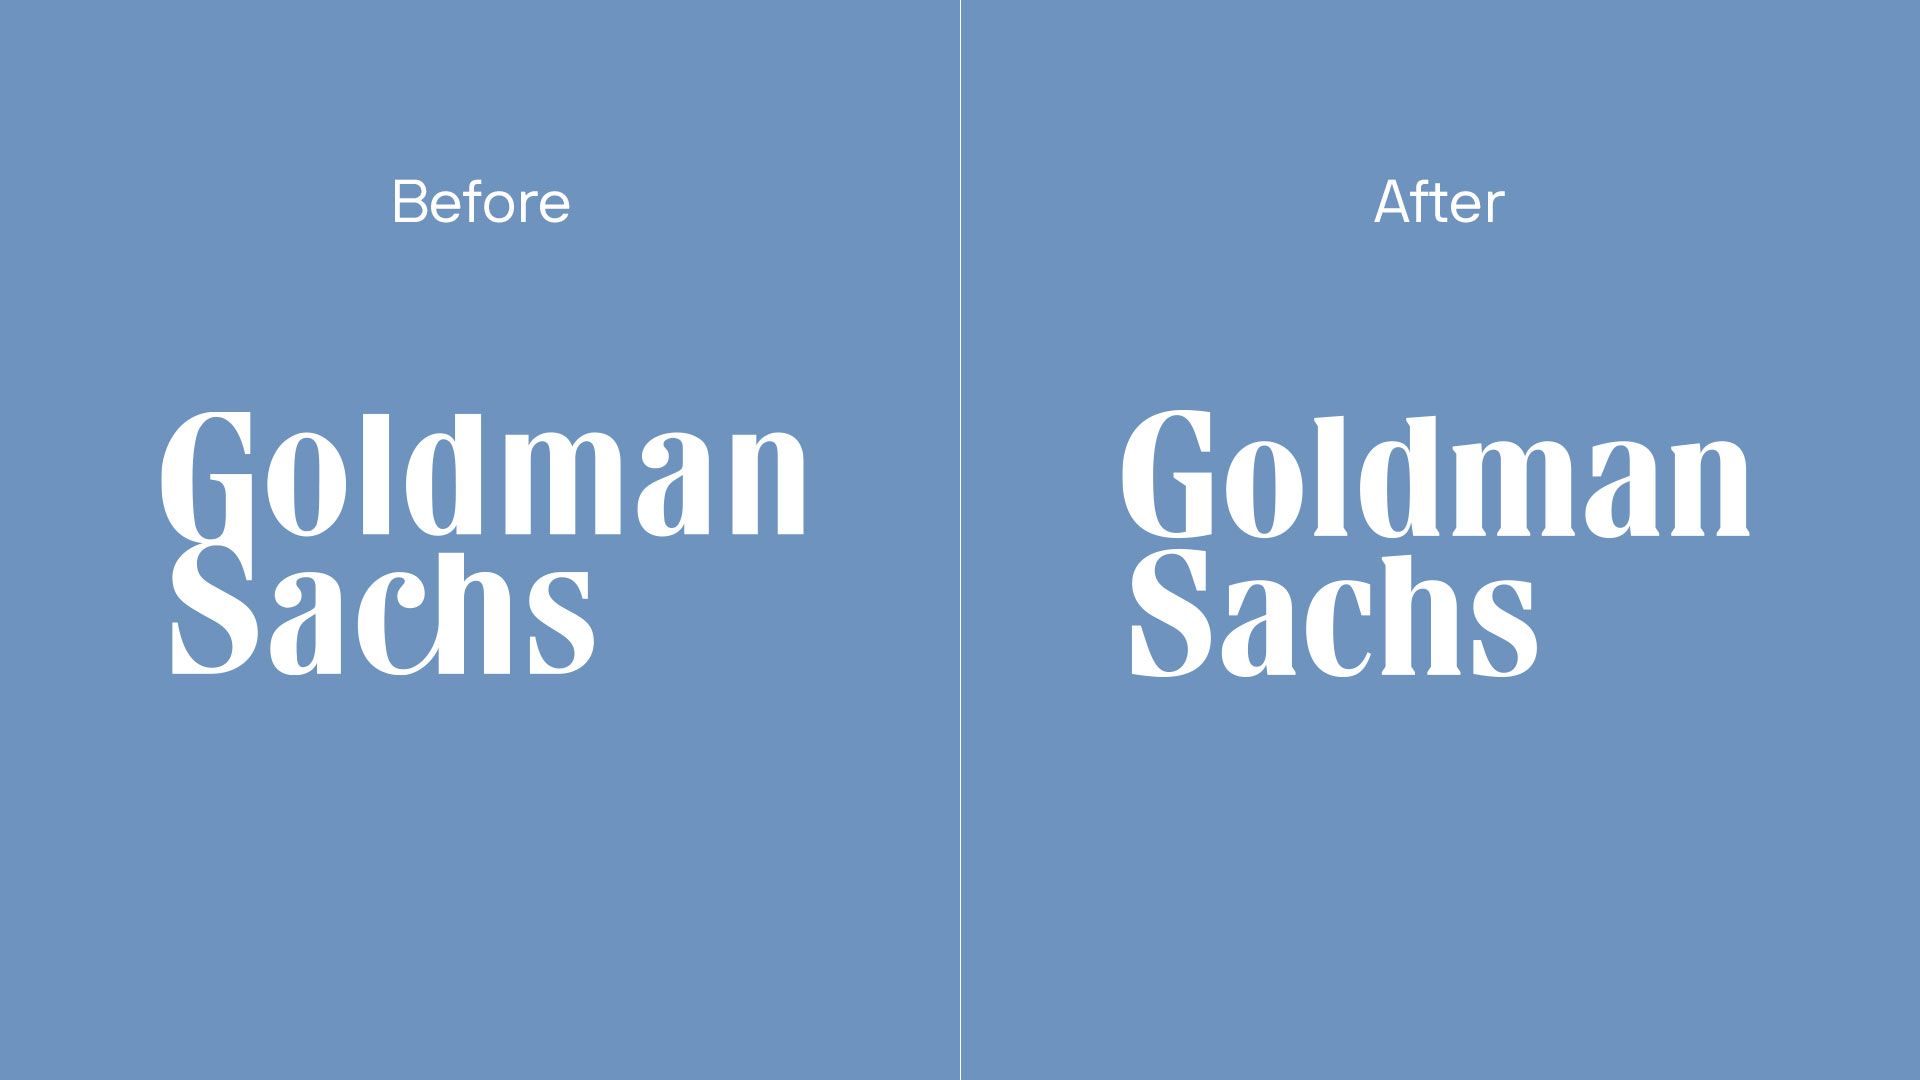 The old and new Goldman Sachs logos